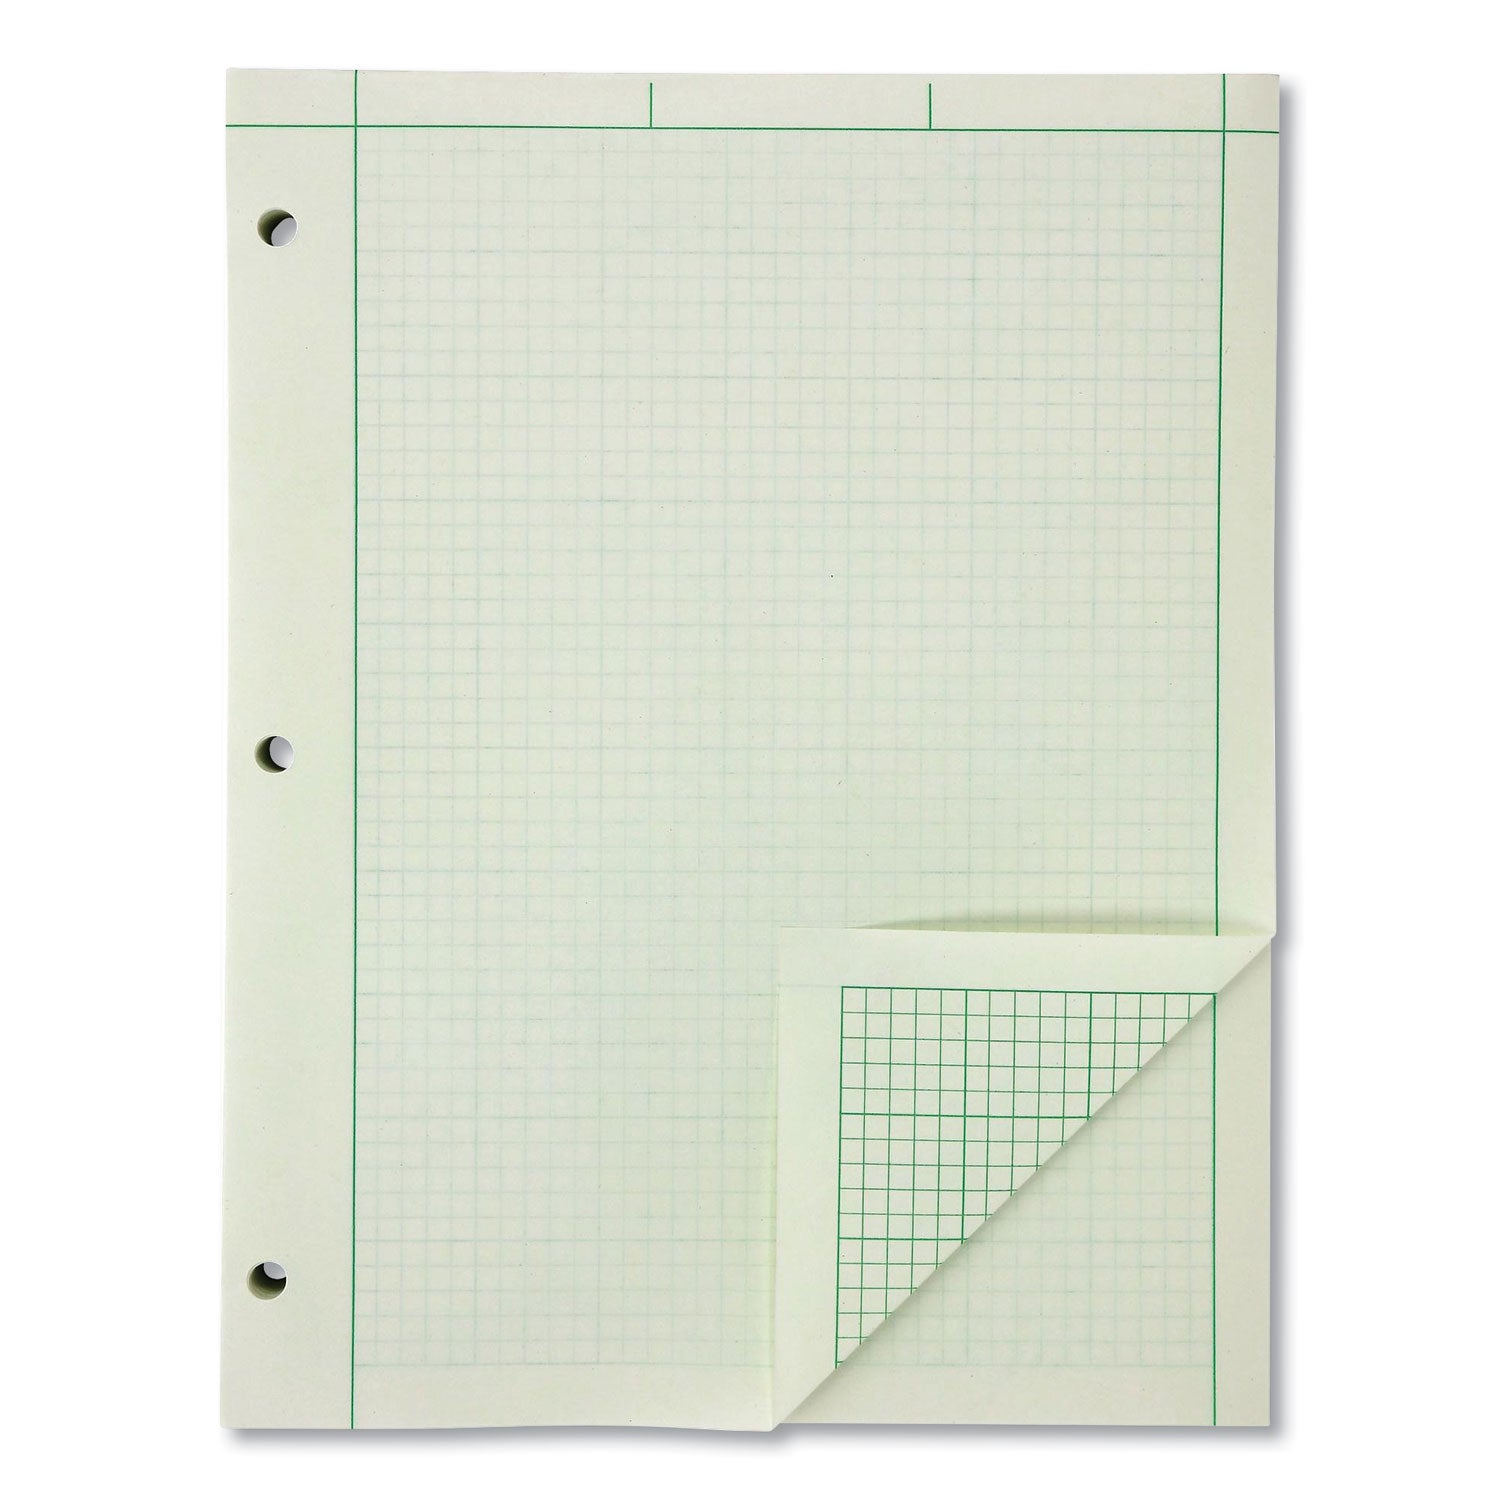 evidence-engineers-computation-pad-cross-section-quadrille-rule-5-sq-in-1-sq-in-200-green-tint-85-x-11-sheets_amp22144 - 1